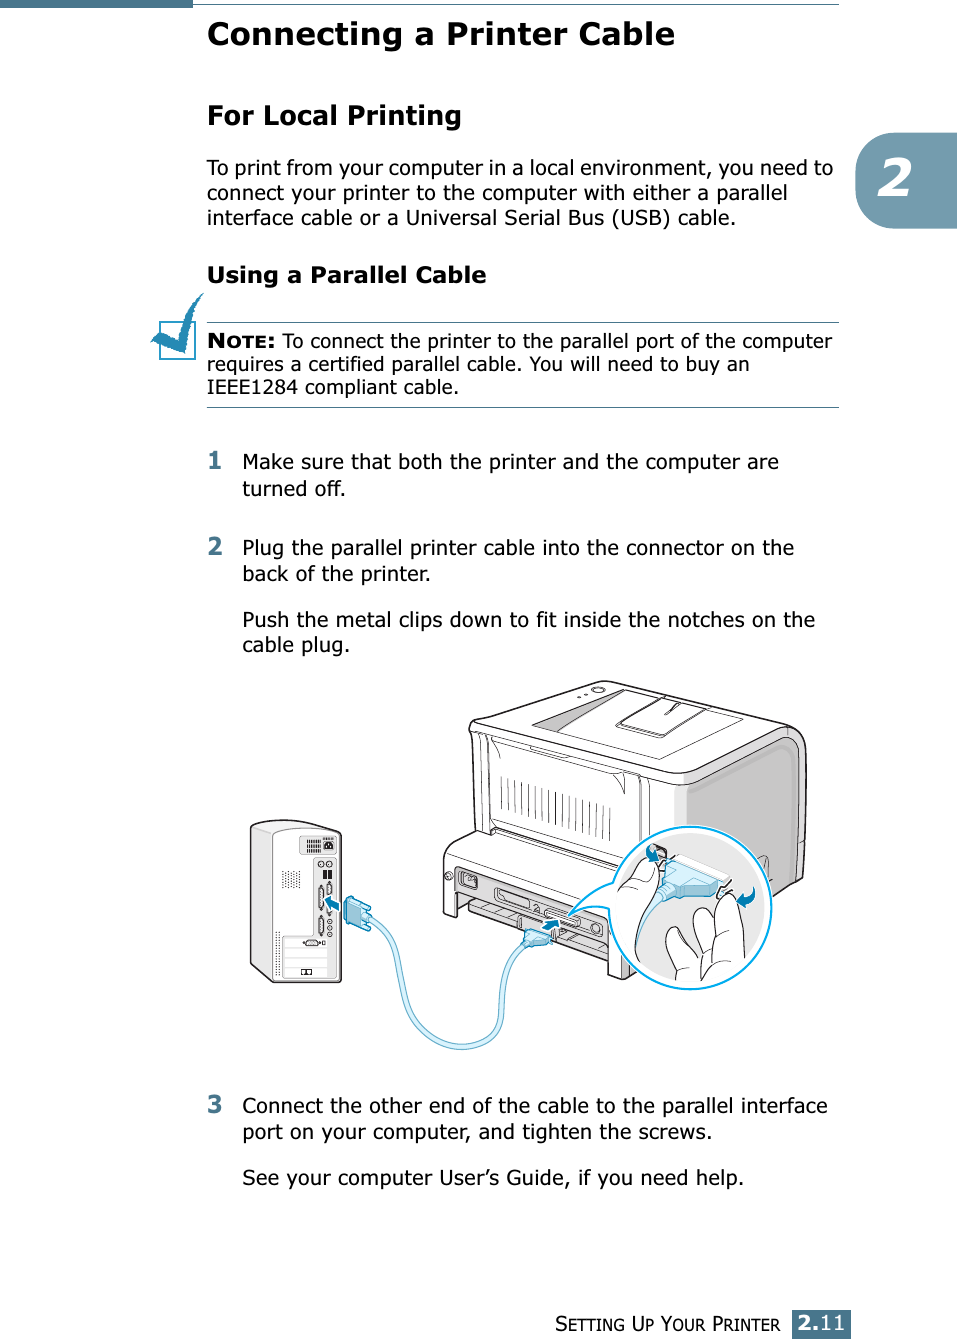 SETTING UP YOUR PRINTER2.112Connecting a Printer CableFor Local PrintingTo print from your computer in a local environment, you need to connect your printer to the computer with either a parallel interface cable or a Universal Serial Bus (USB) cable. Using a Parallel CableNOTE: To connect the printer to the parallel port of the computer requires a certified parallel cable. You will need to buy an IEEE1284 compliant cable.1Make sure that both the printer and the computer are turned off.2Plug the parallel printer cable into the connector on the back of the printer. Push the metal clips down to fit inside the notches on the cable plug.3Connect the other end of the cable to the parallel interface port on your computer, and tighten the screws. See your computer User’s Guide, if you need help.